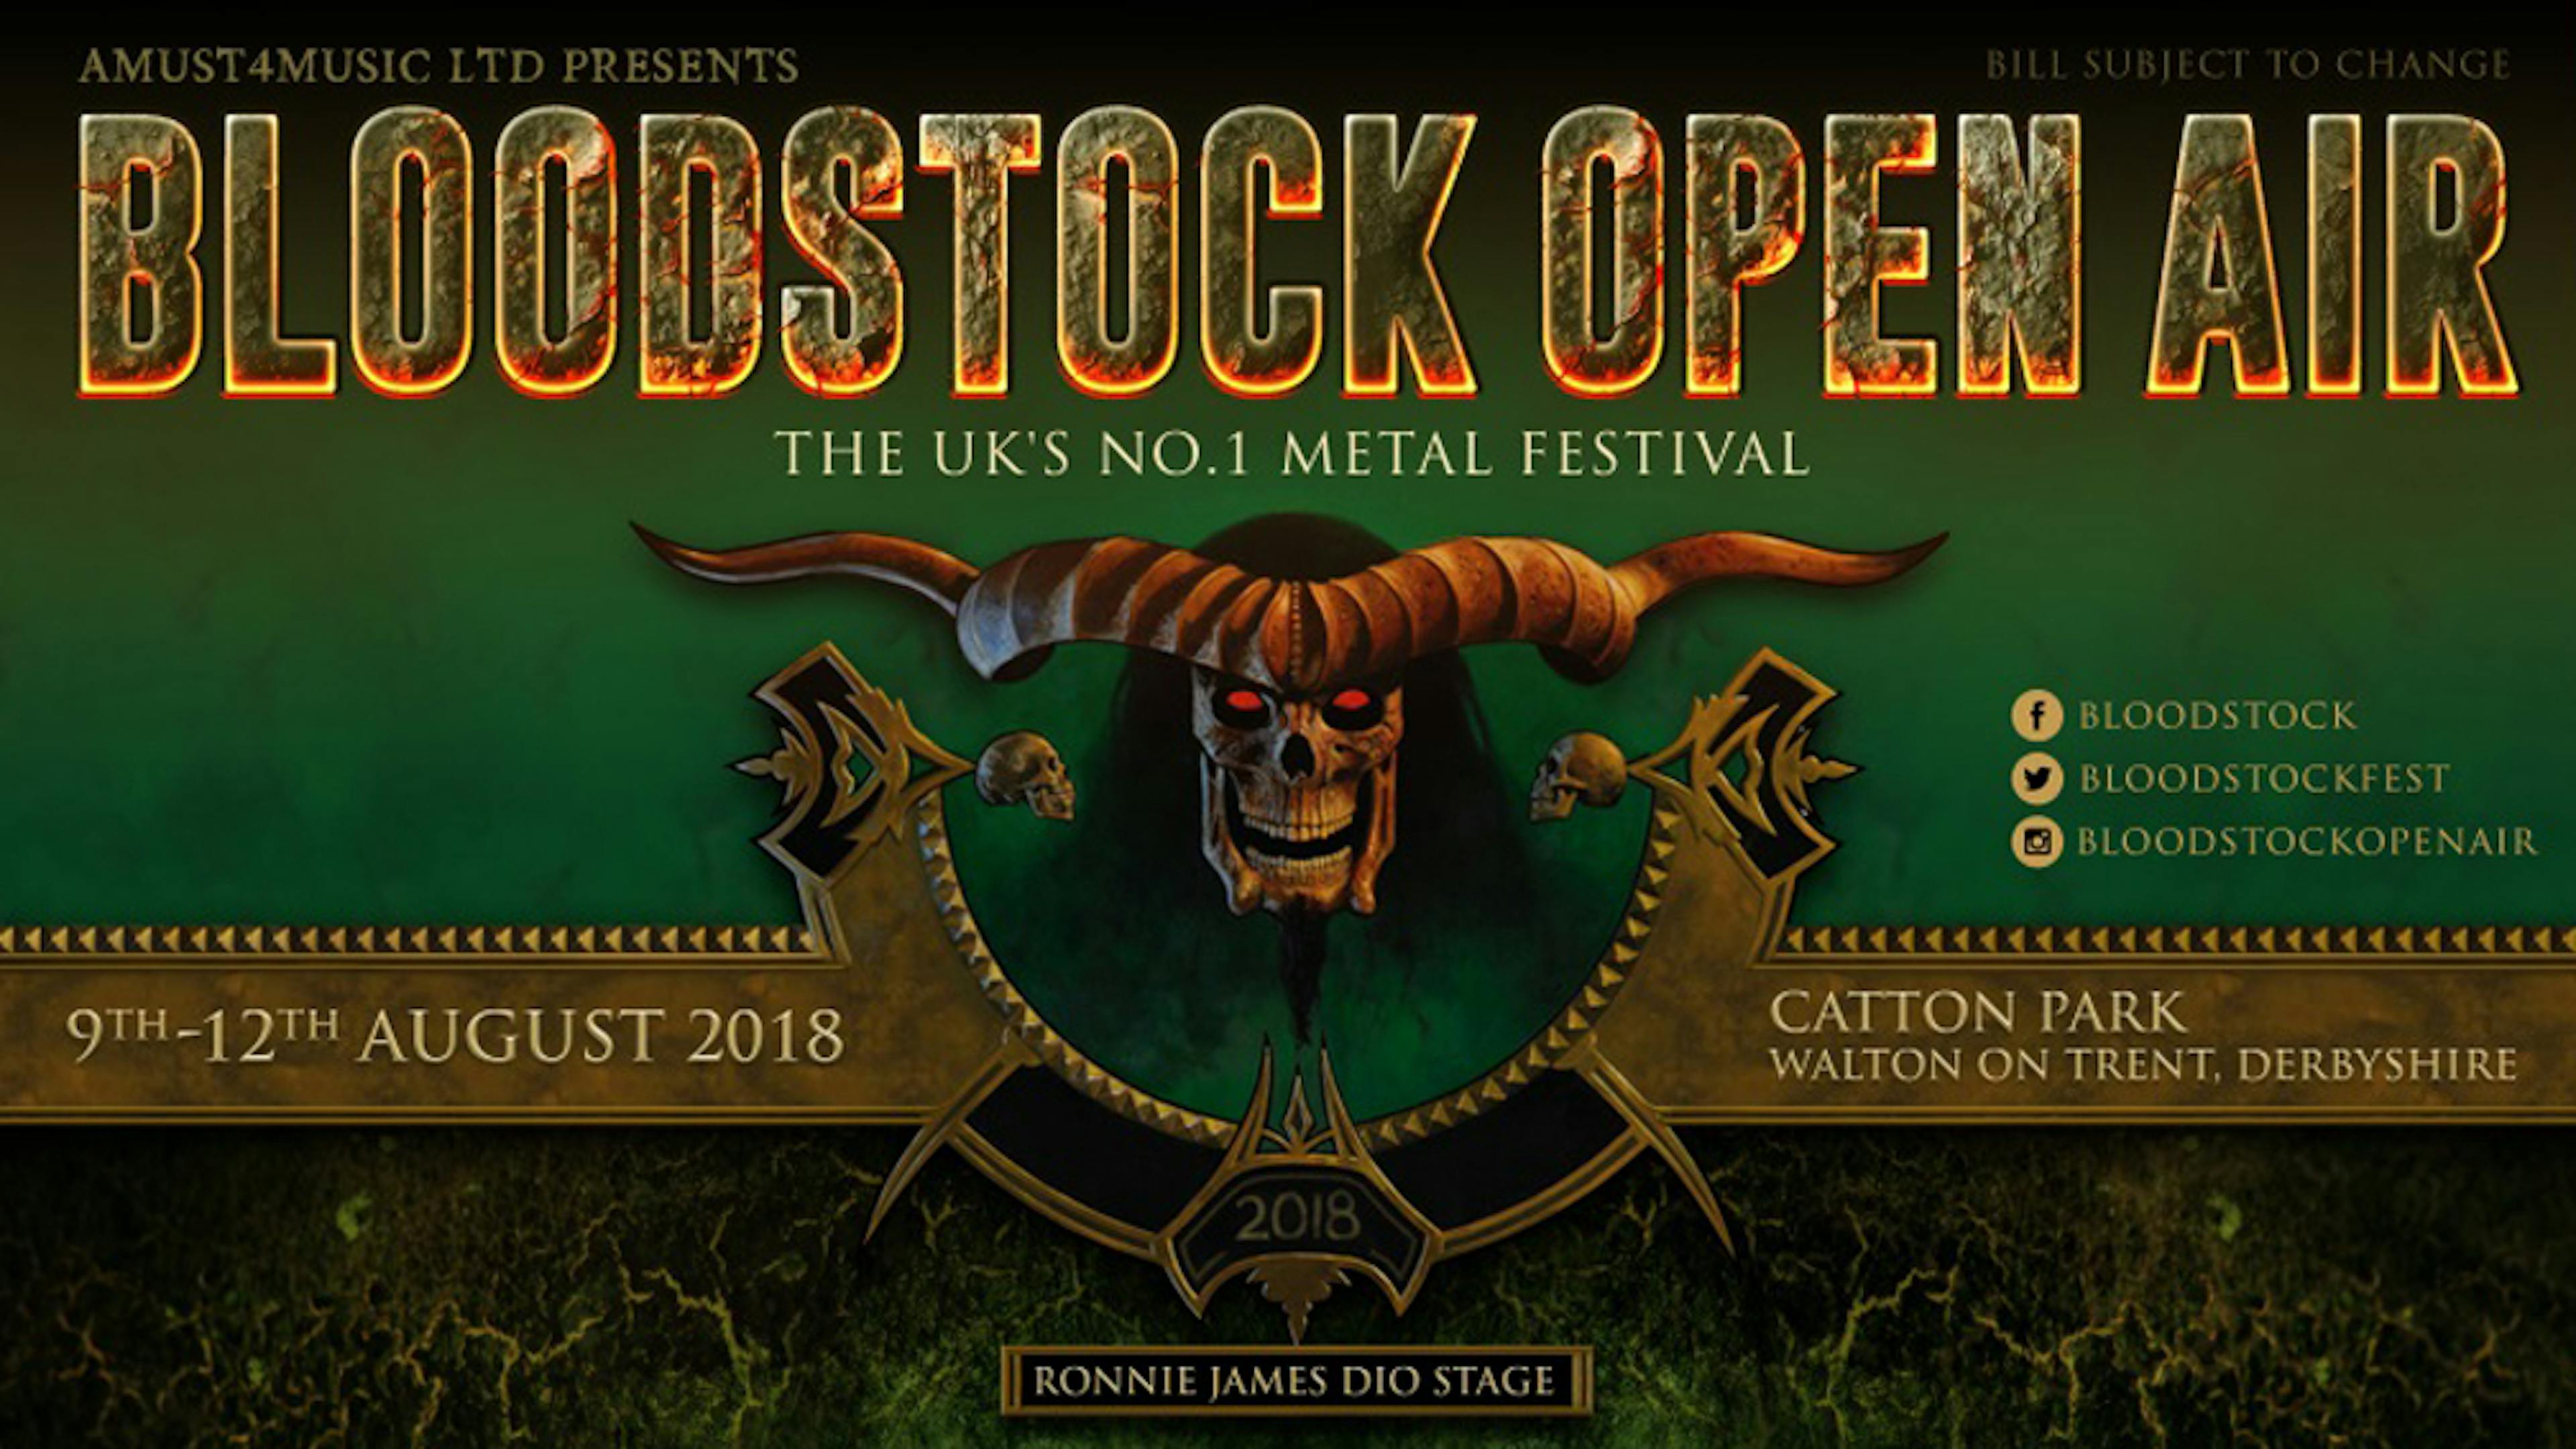 Bloodstock Have Added More Bands To Their 2018 Line-Up